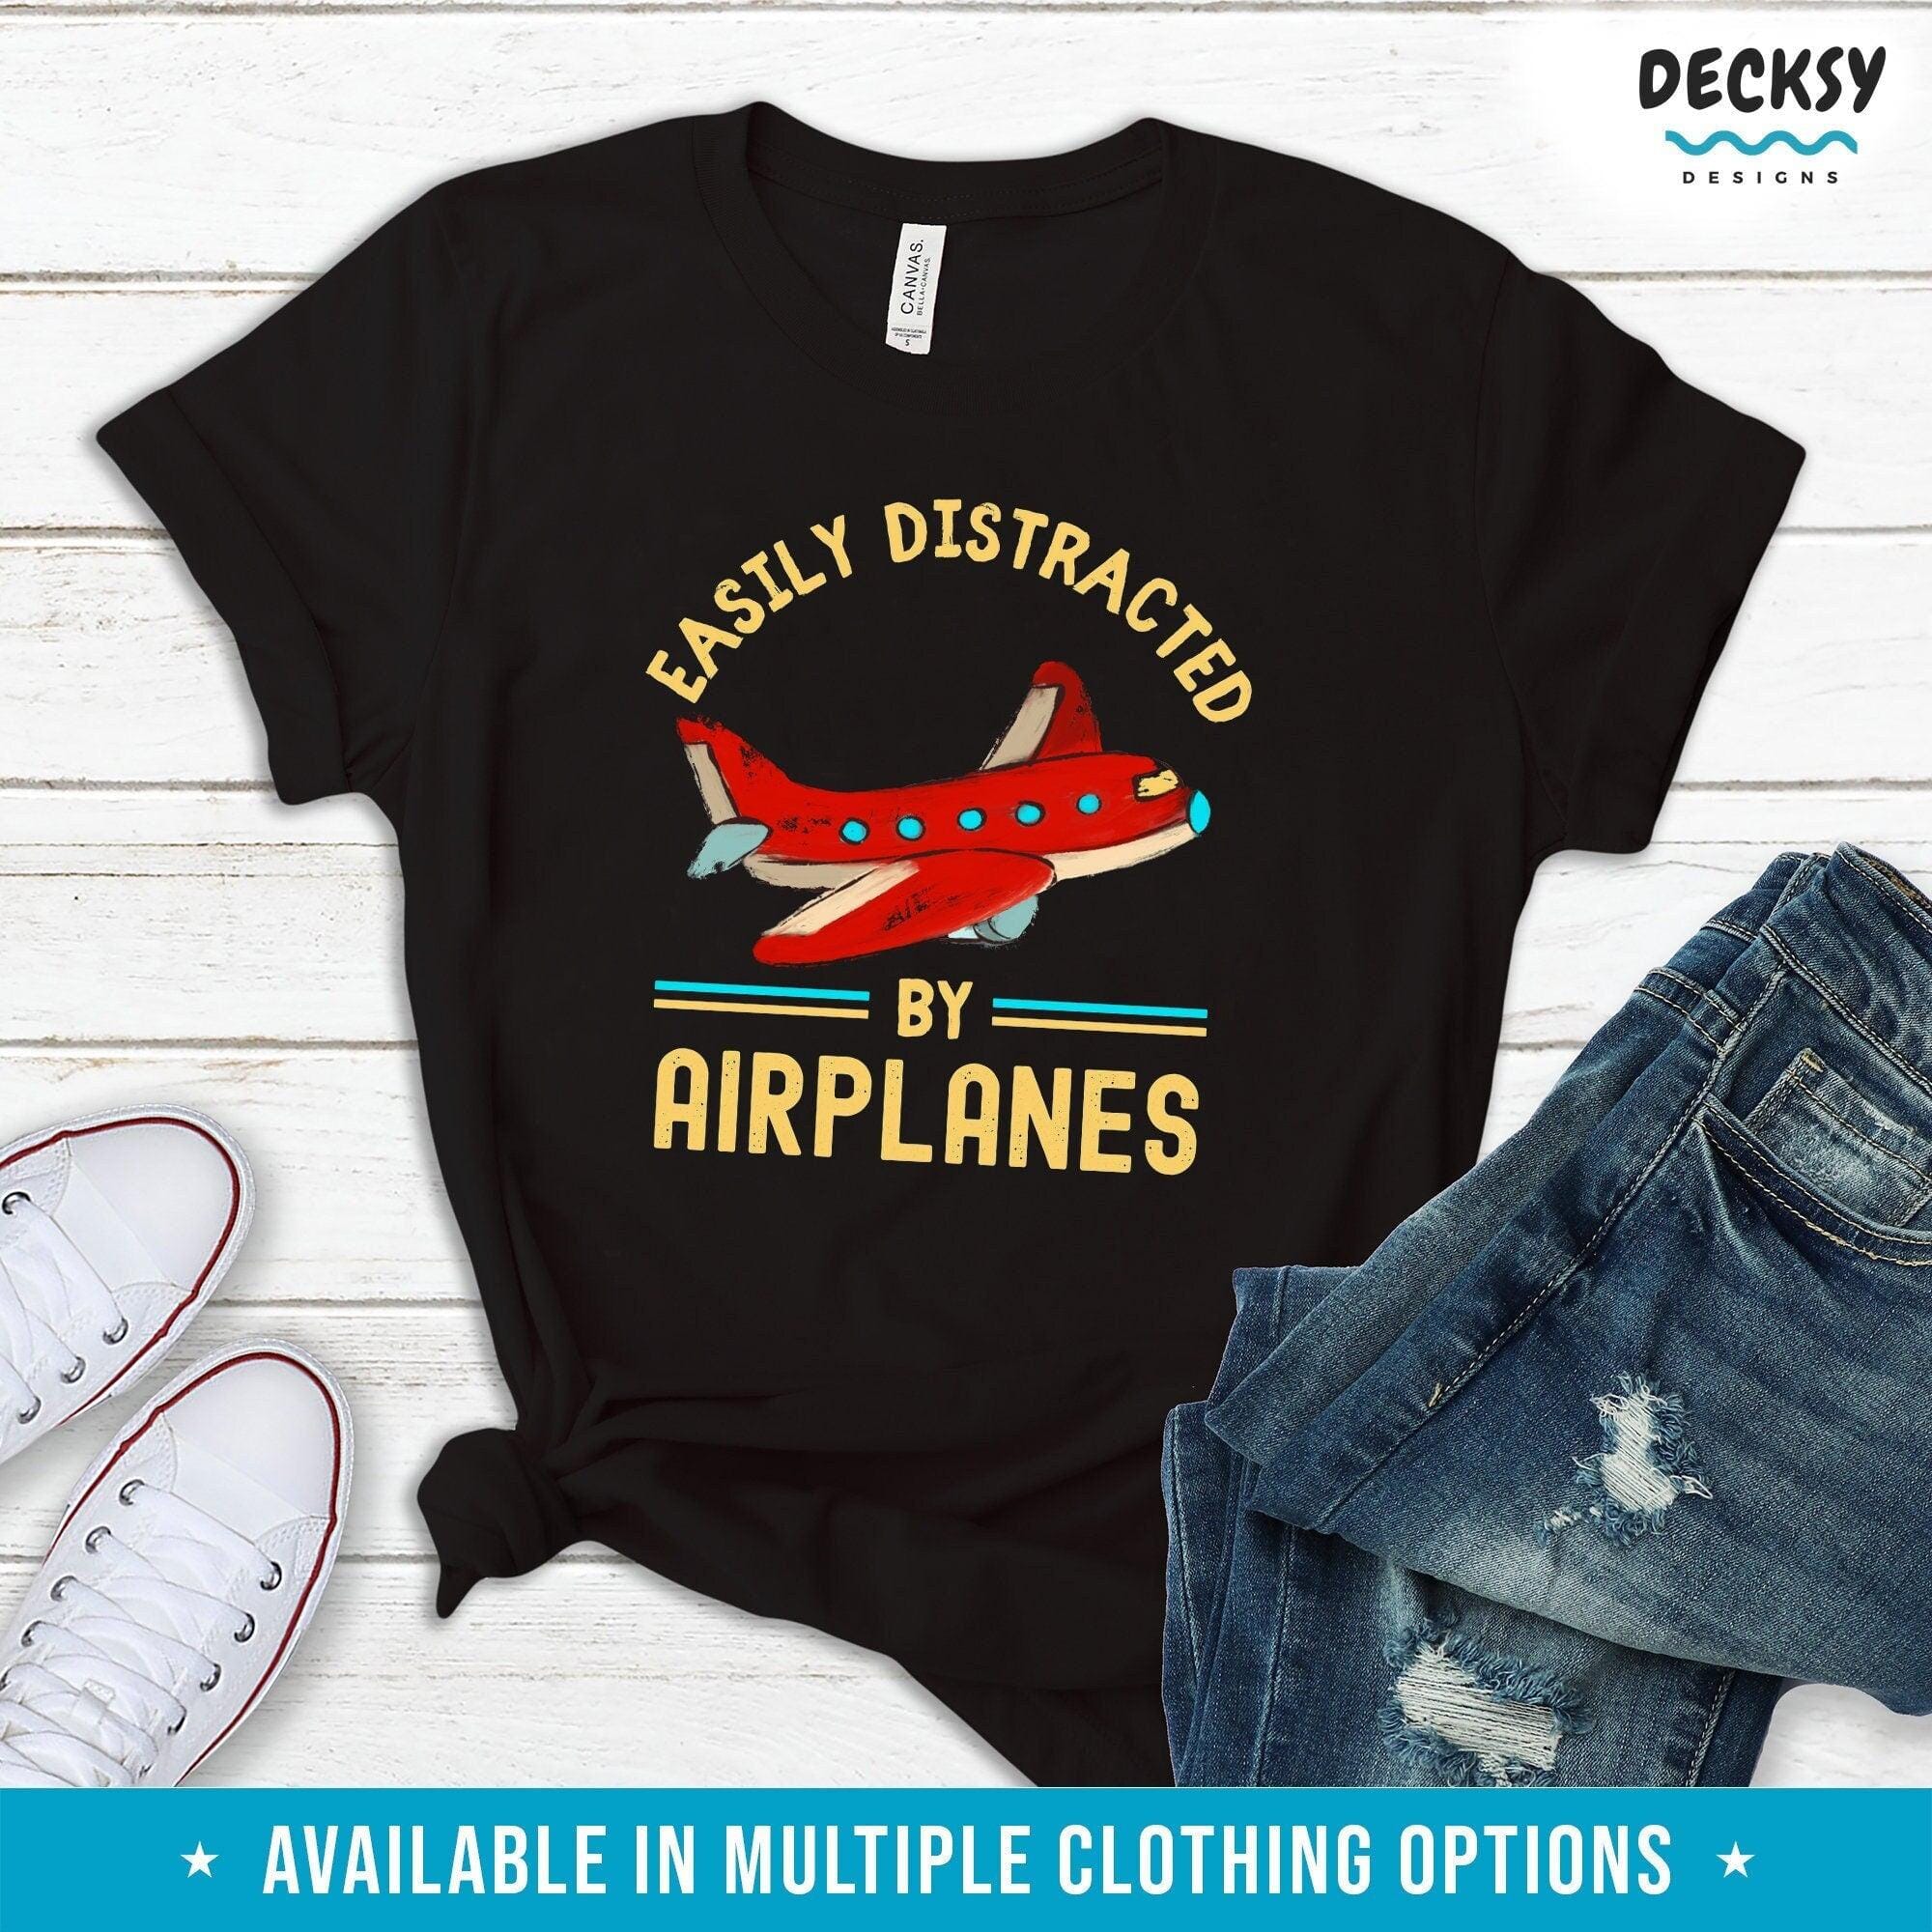 Easily Distracted By Airplanes Shirt, Aviation Gift-Clothing:Gender-Neutral Adult Clothing:Tops & Tees:T-shirts:Graphic Tees-DecksyDesigns